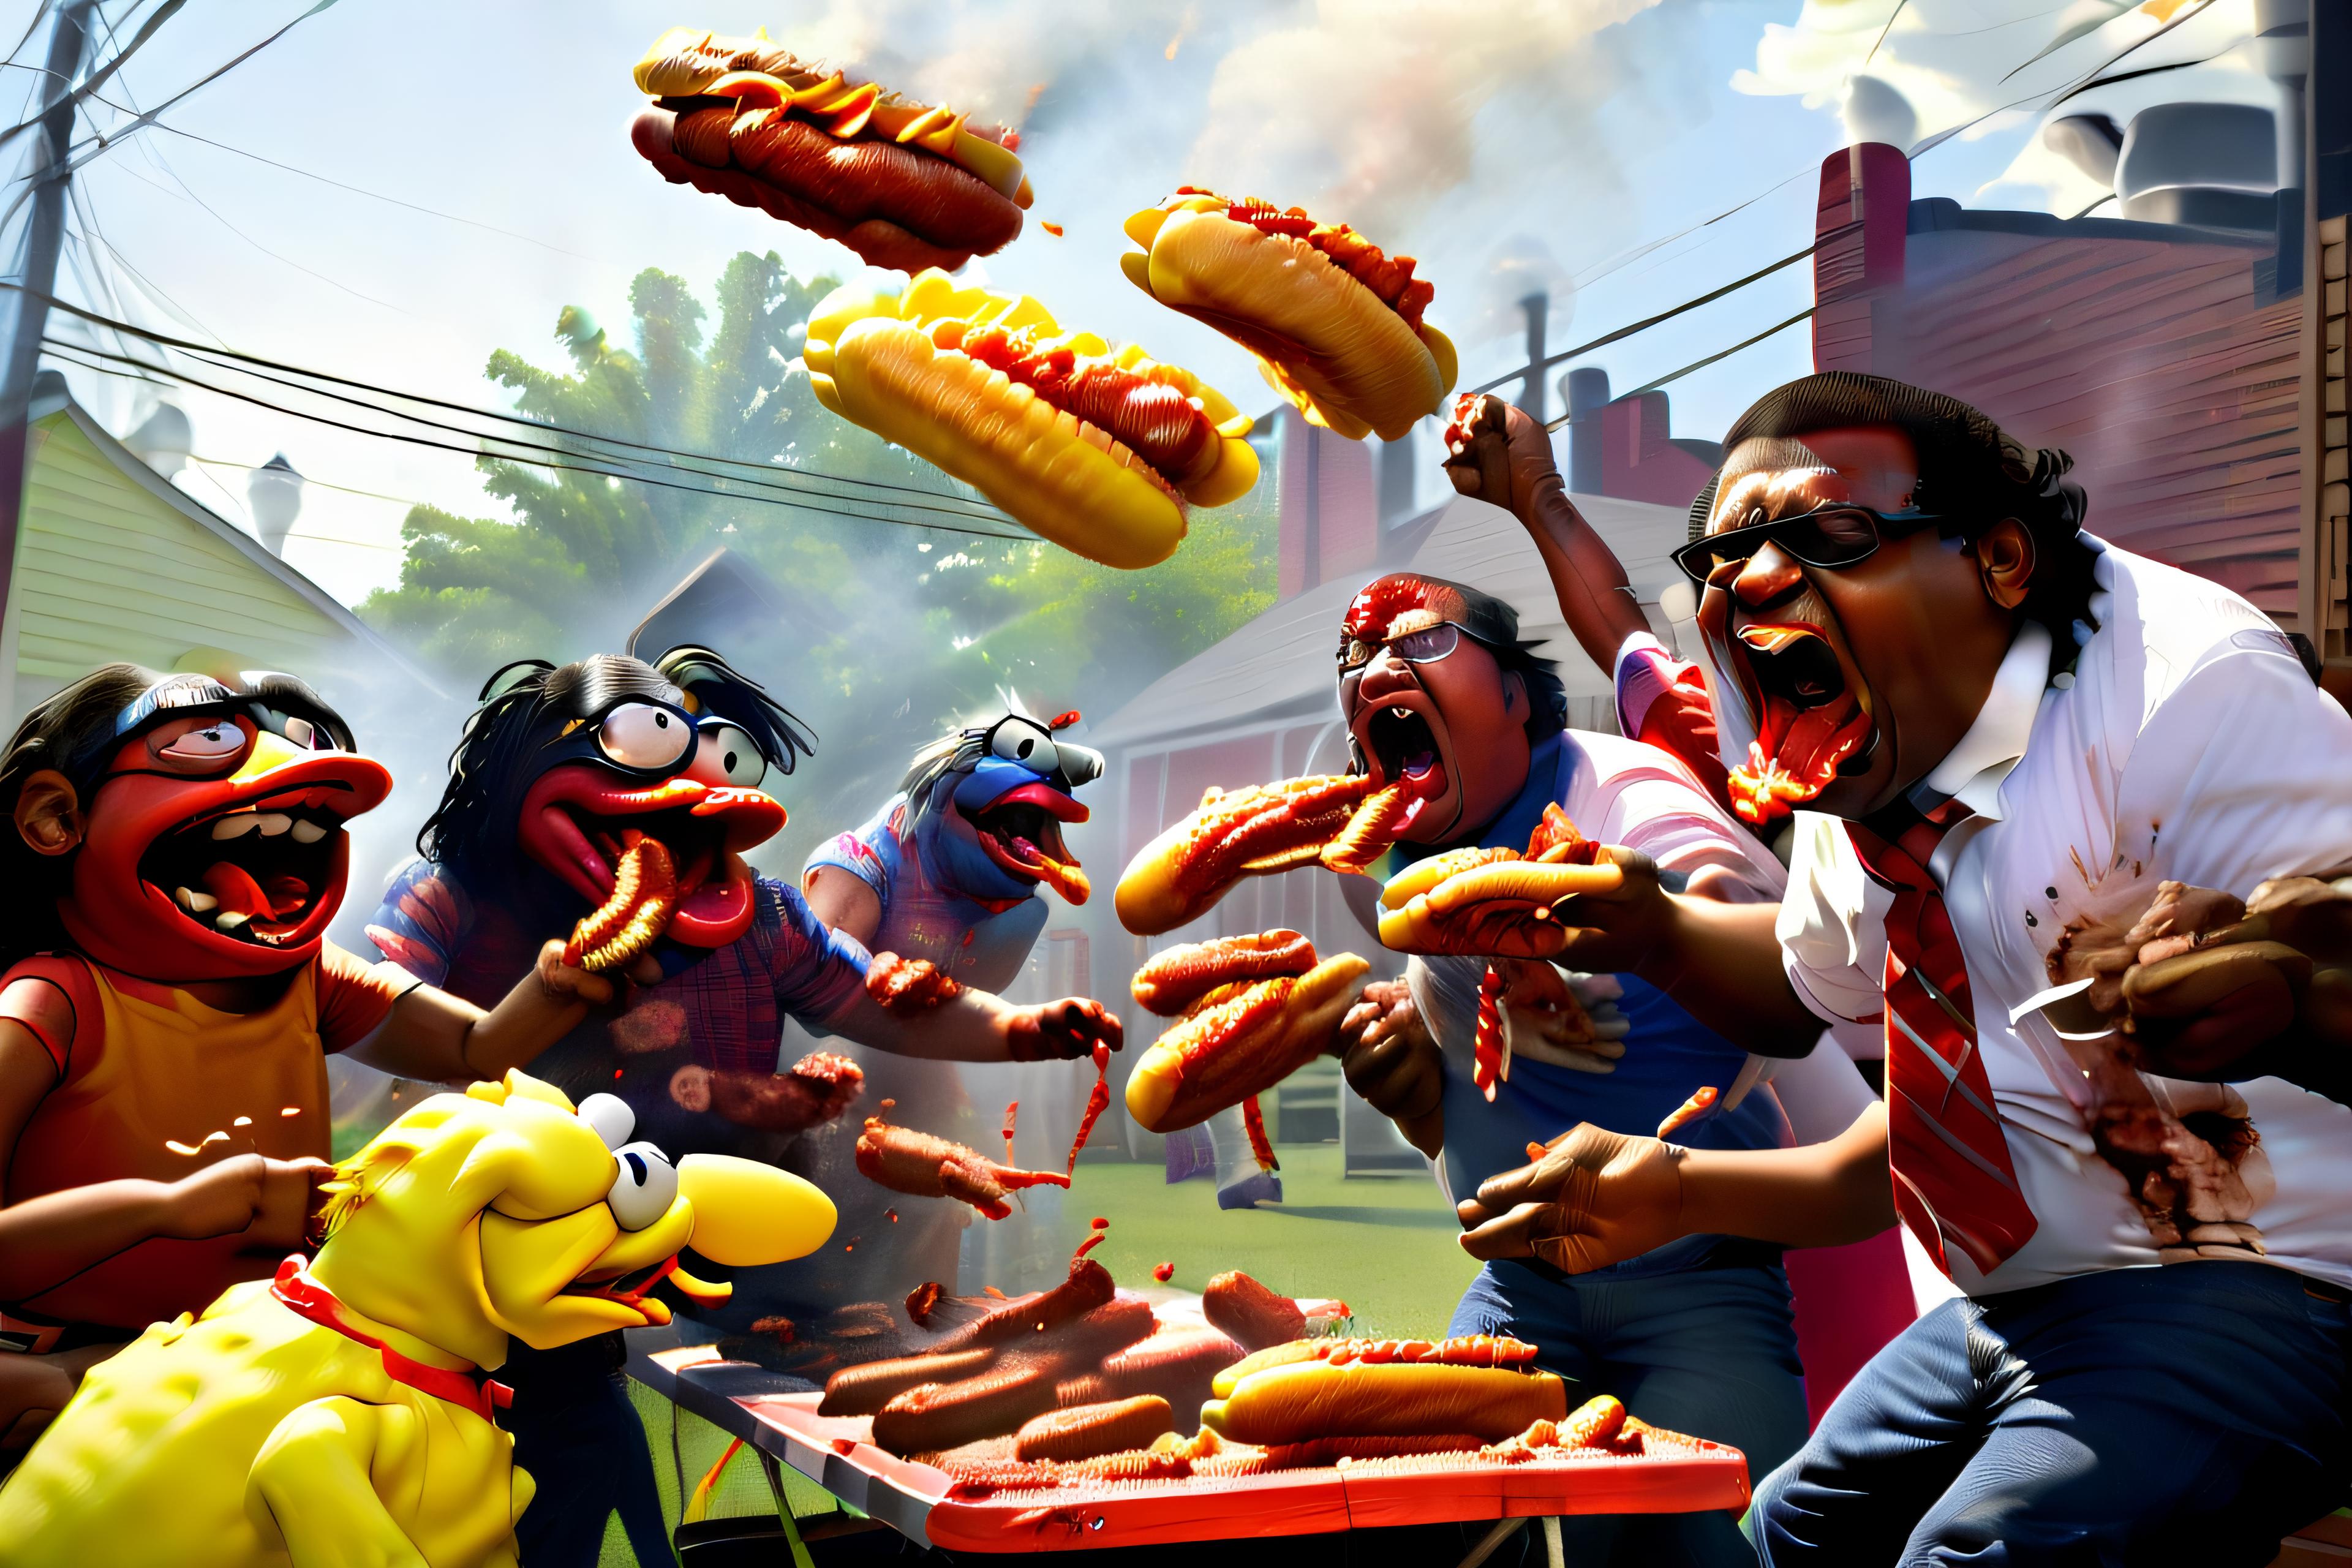 Cookout Food Fight image by patricktoba